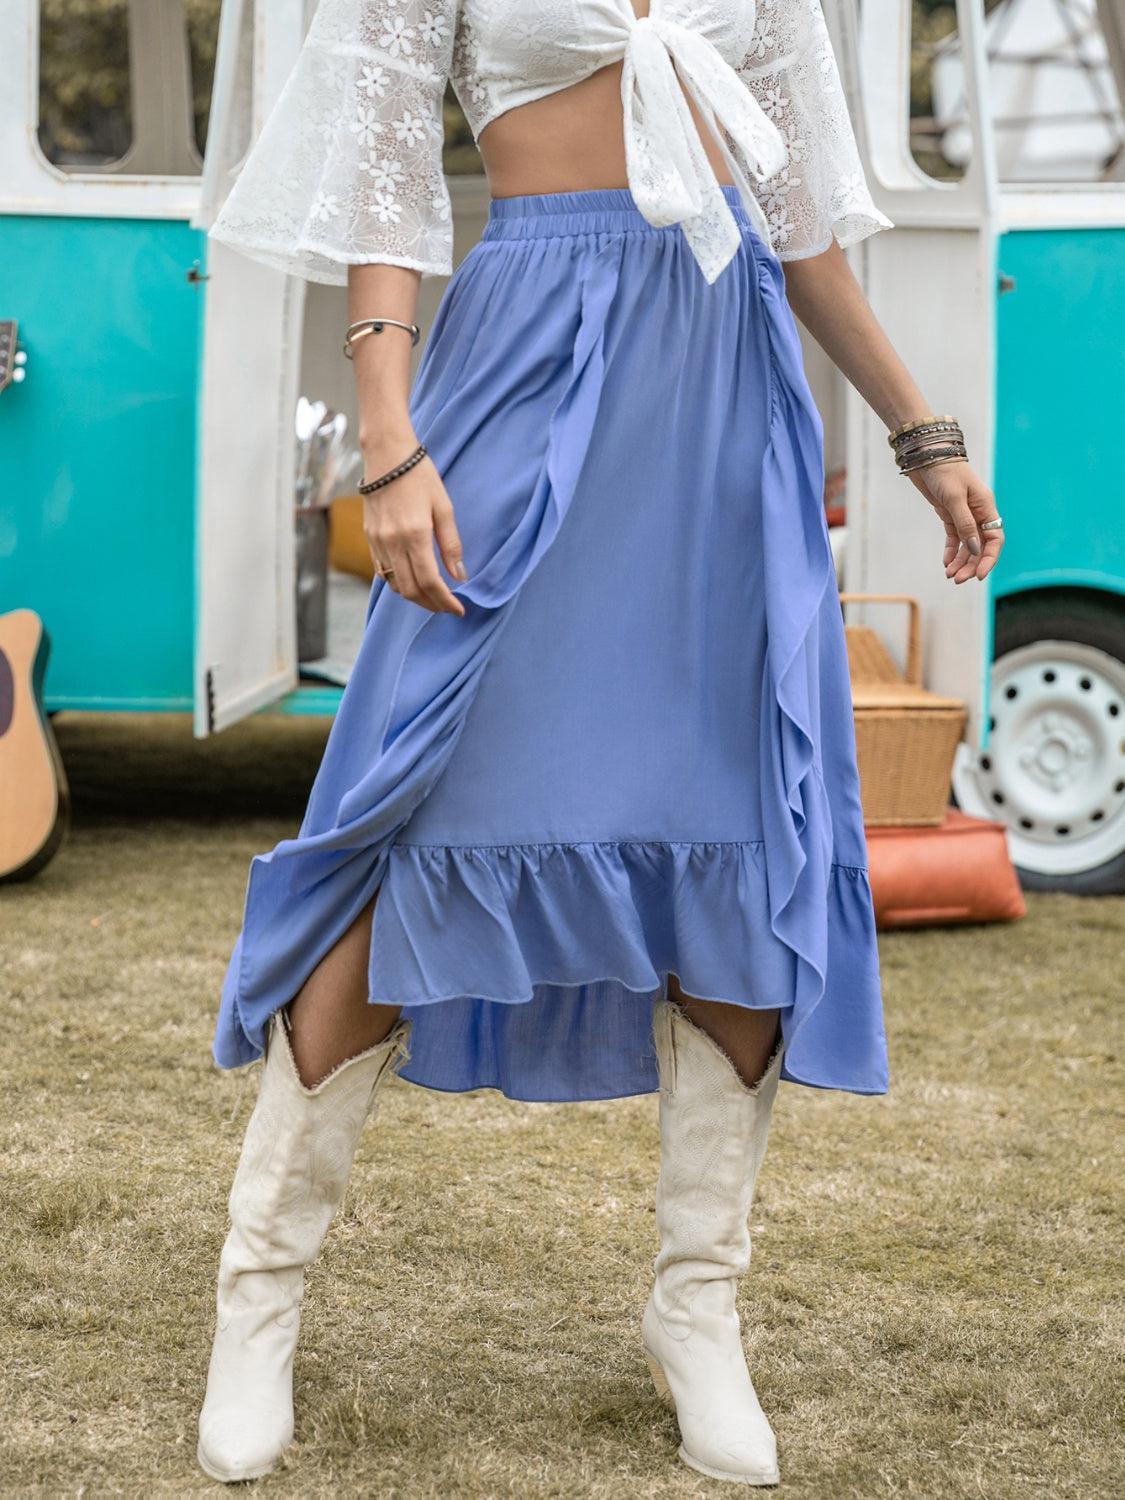 a woman in a white top and blue skirt